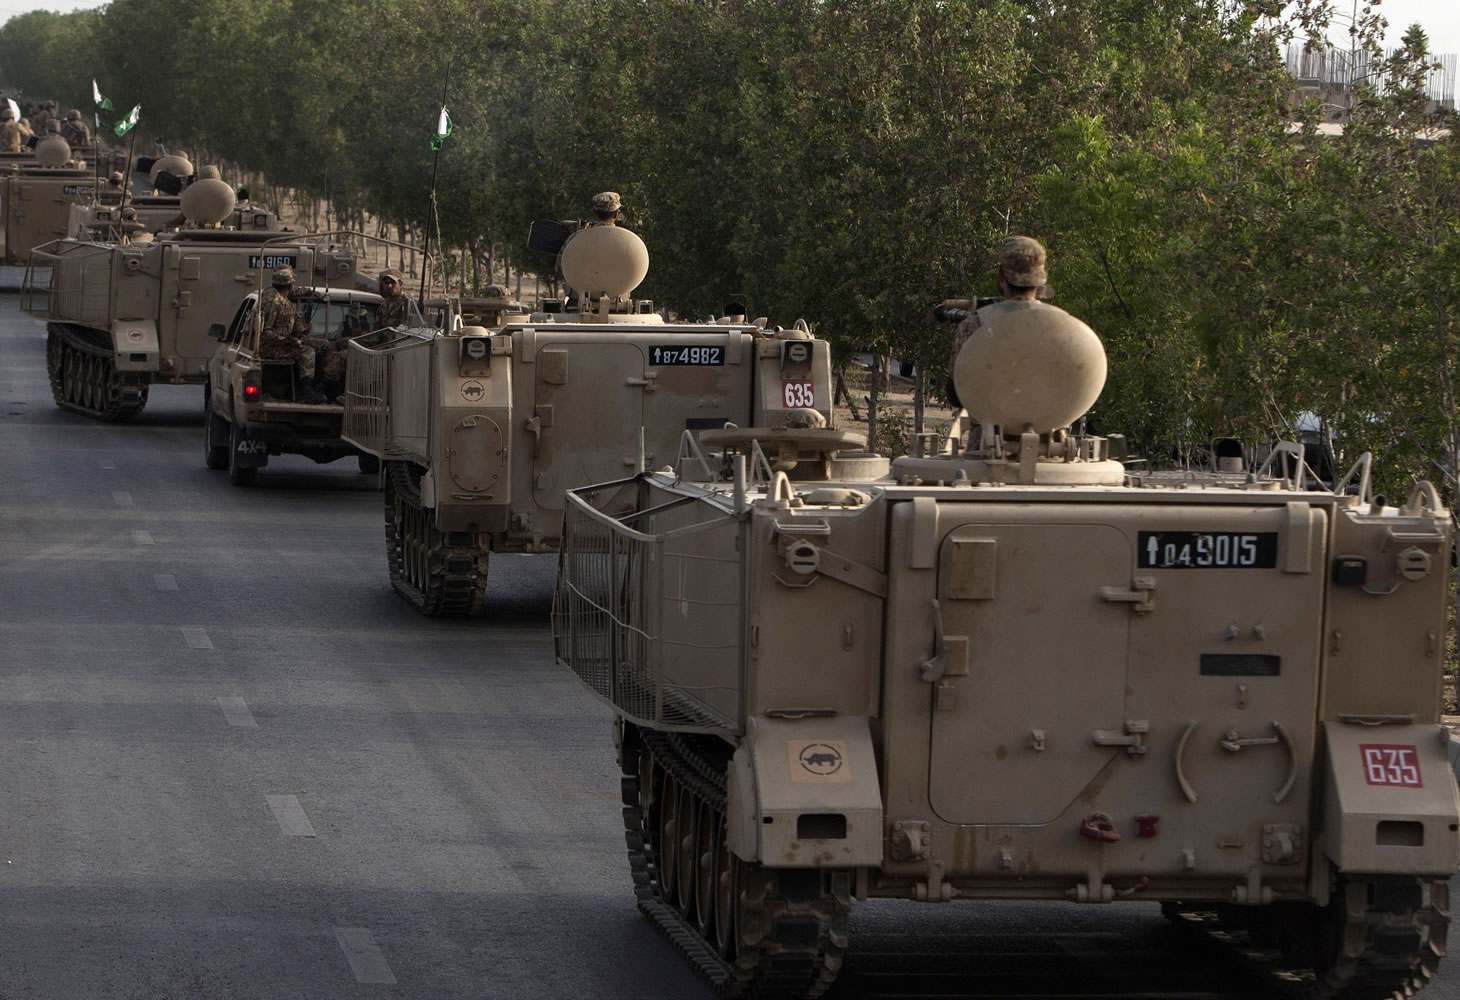 Pakistani army troops ride military vehicles Monday in Karachi, Pakistan, after launching an offensive against the Taliban in North Waziristan.